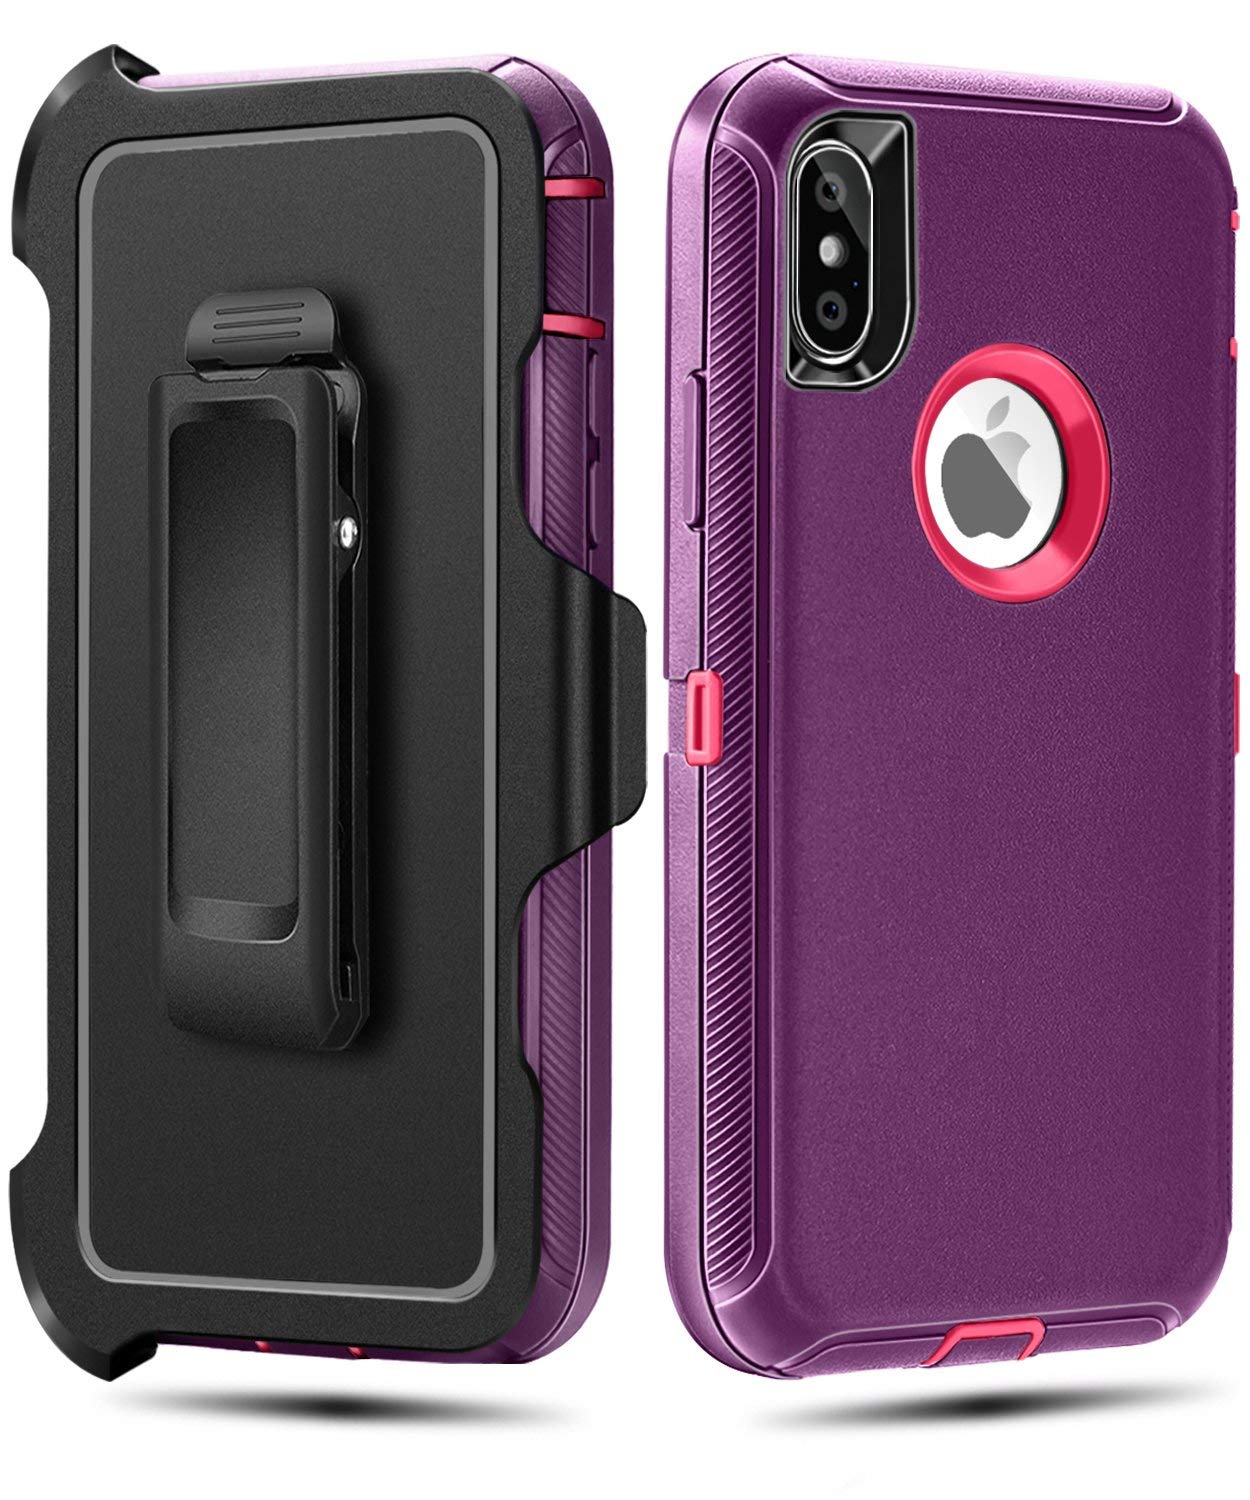 iPhone XS,iPhone X Case,FOGEEK Belt Clip Holster Heavy Duty Kickstand Cover [Support Wireless Charging] [Dust-Proof] [Shockproof] Compatible for Apple iPhone XS（2018）, iPhone X（2017）, 5.8 inch (Black and Orange)